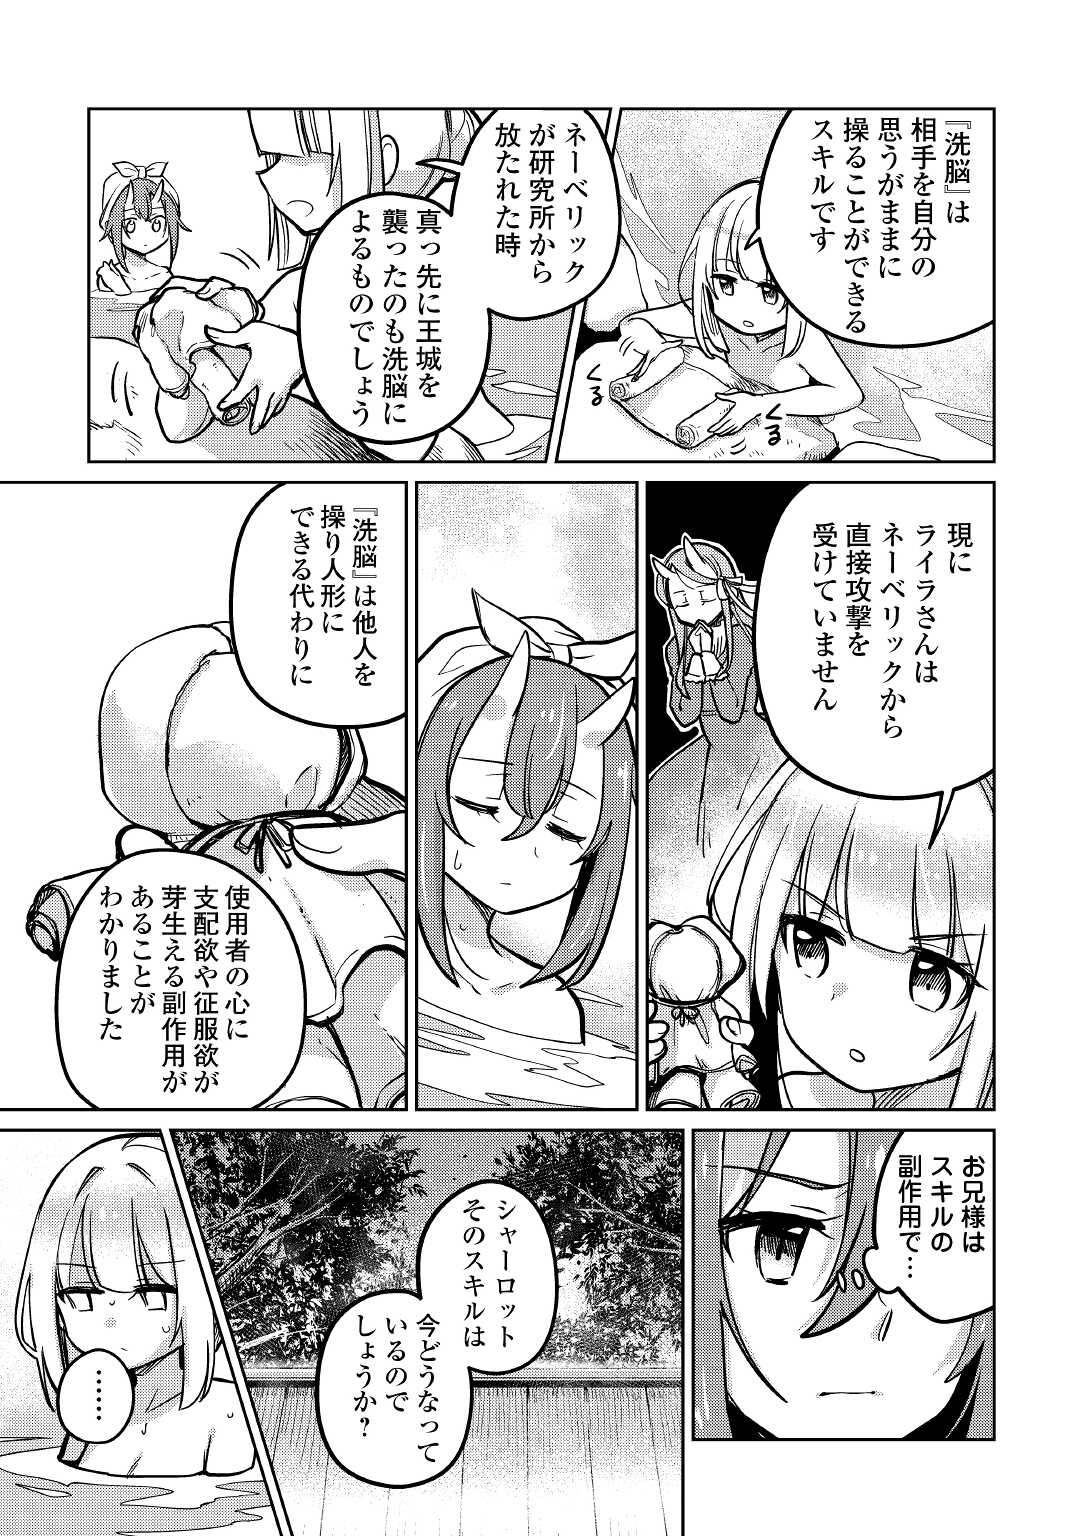 The Former Structural Researcher’s Story of Otherworldly Adventure 第41話 - Page 11